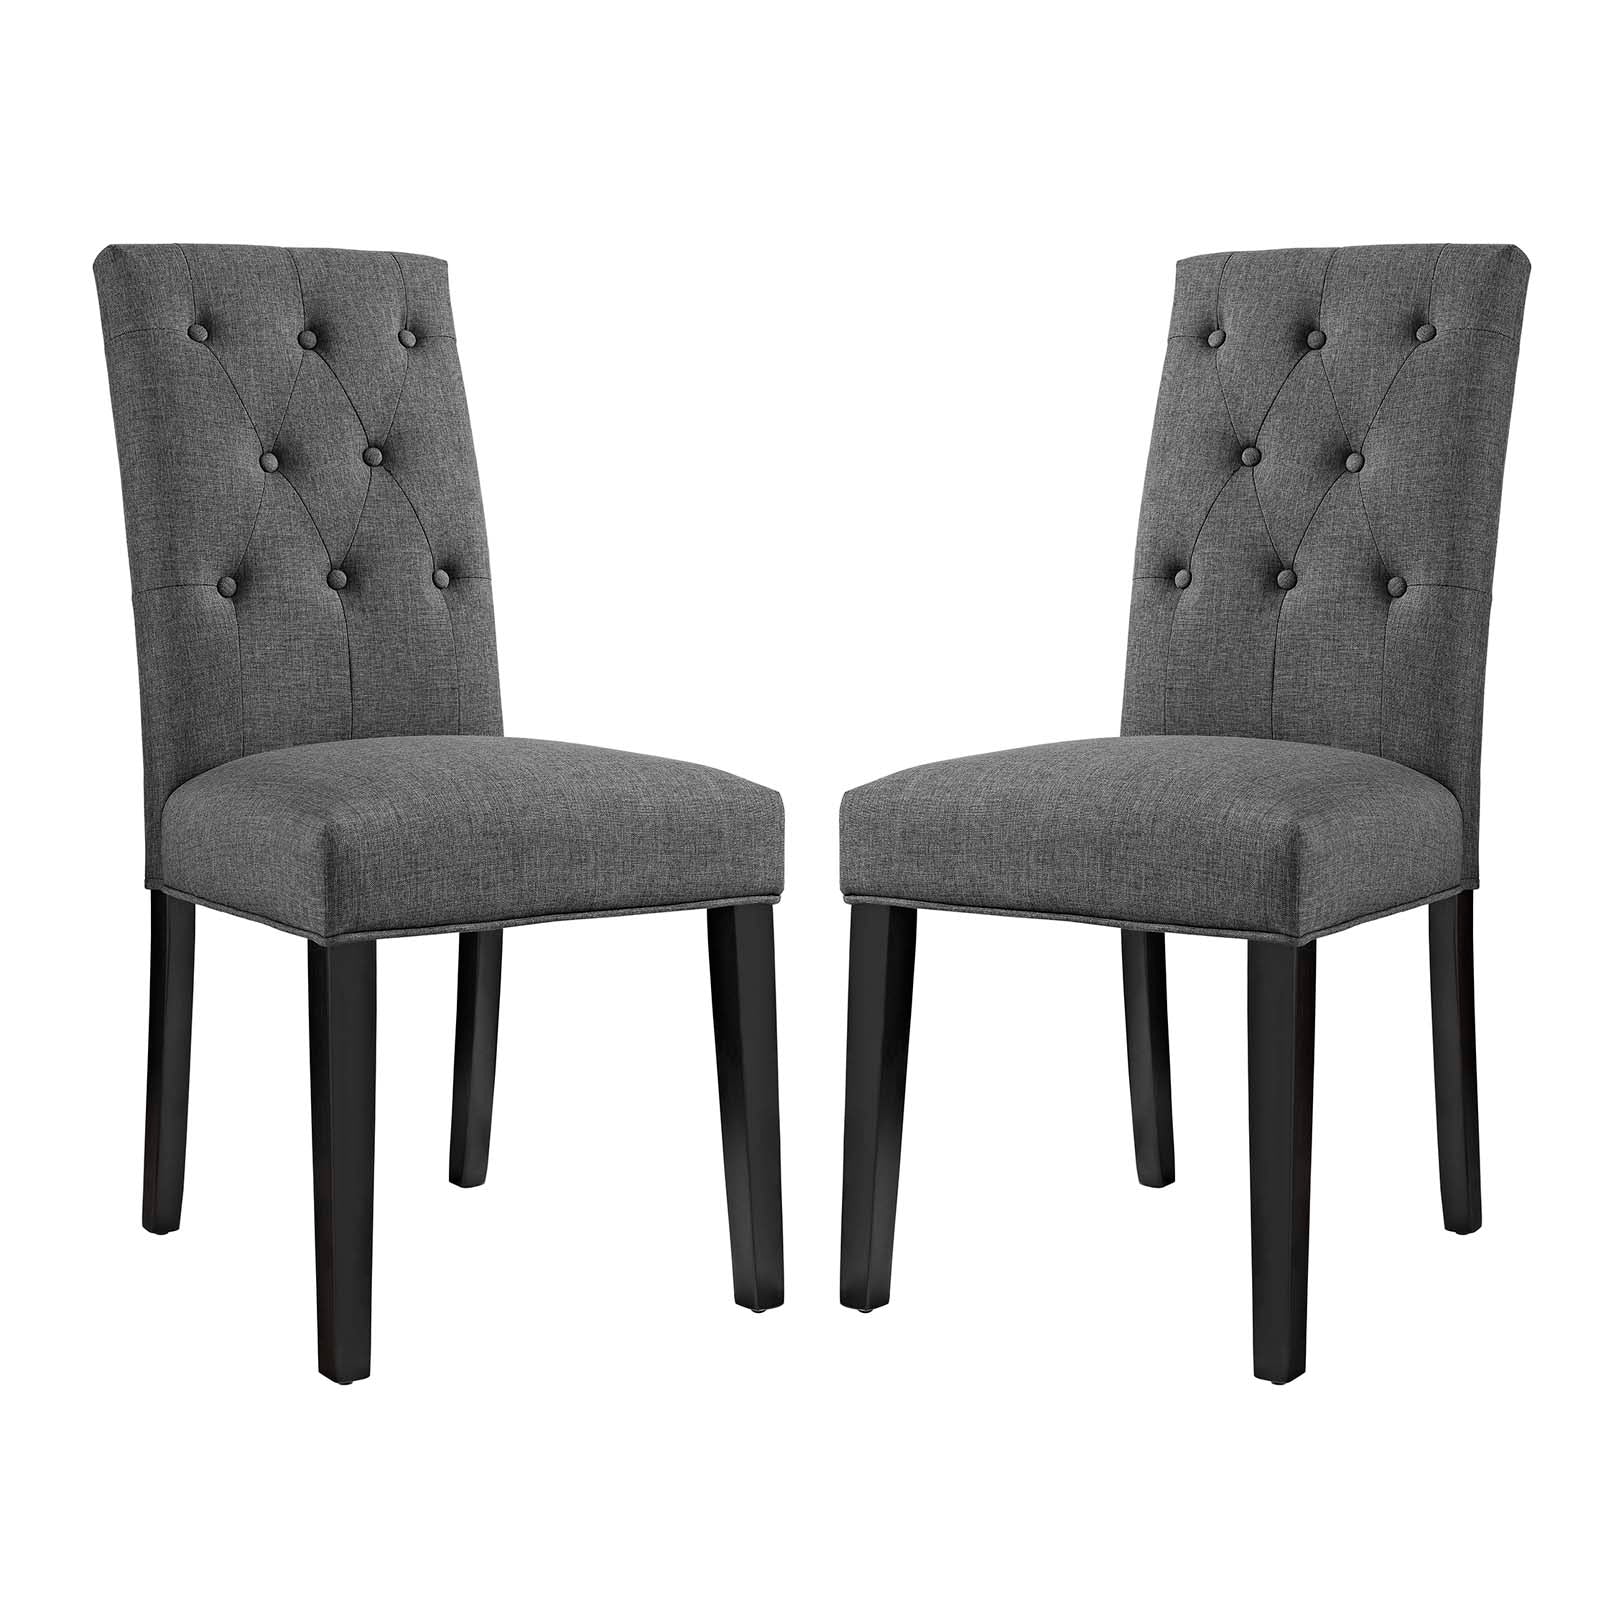 Confer Dining Side Chair Fabric Set of 2 - East Shore Modern Home Furnishings